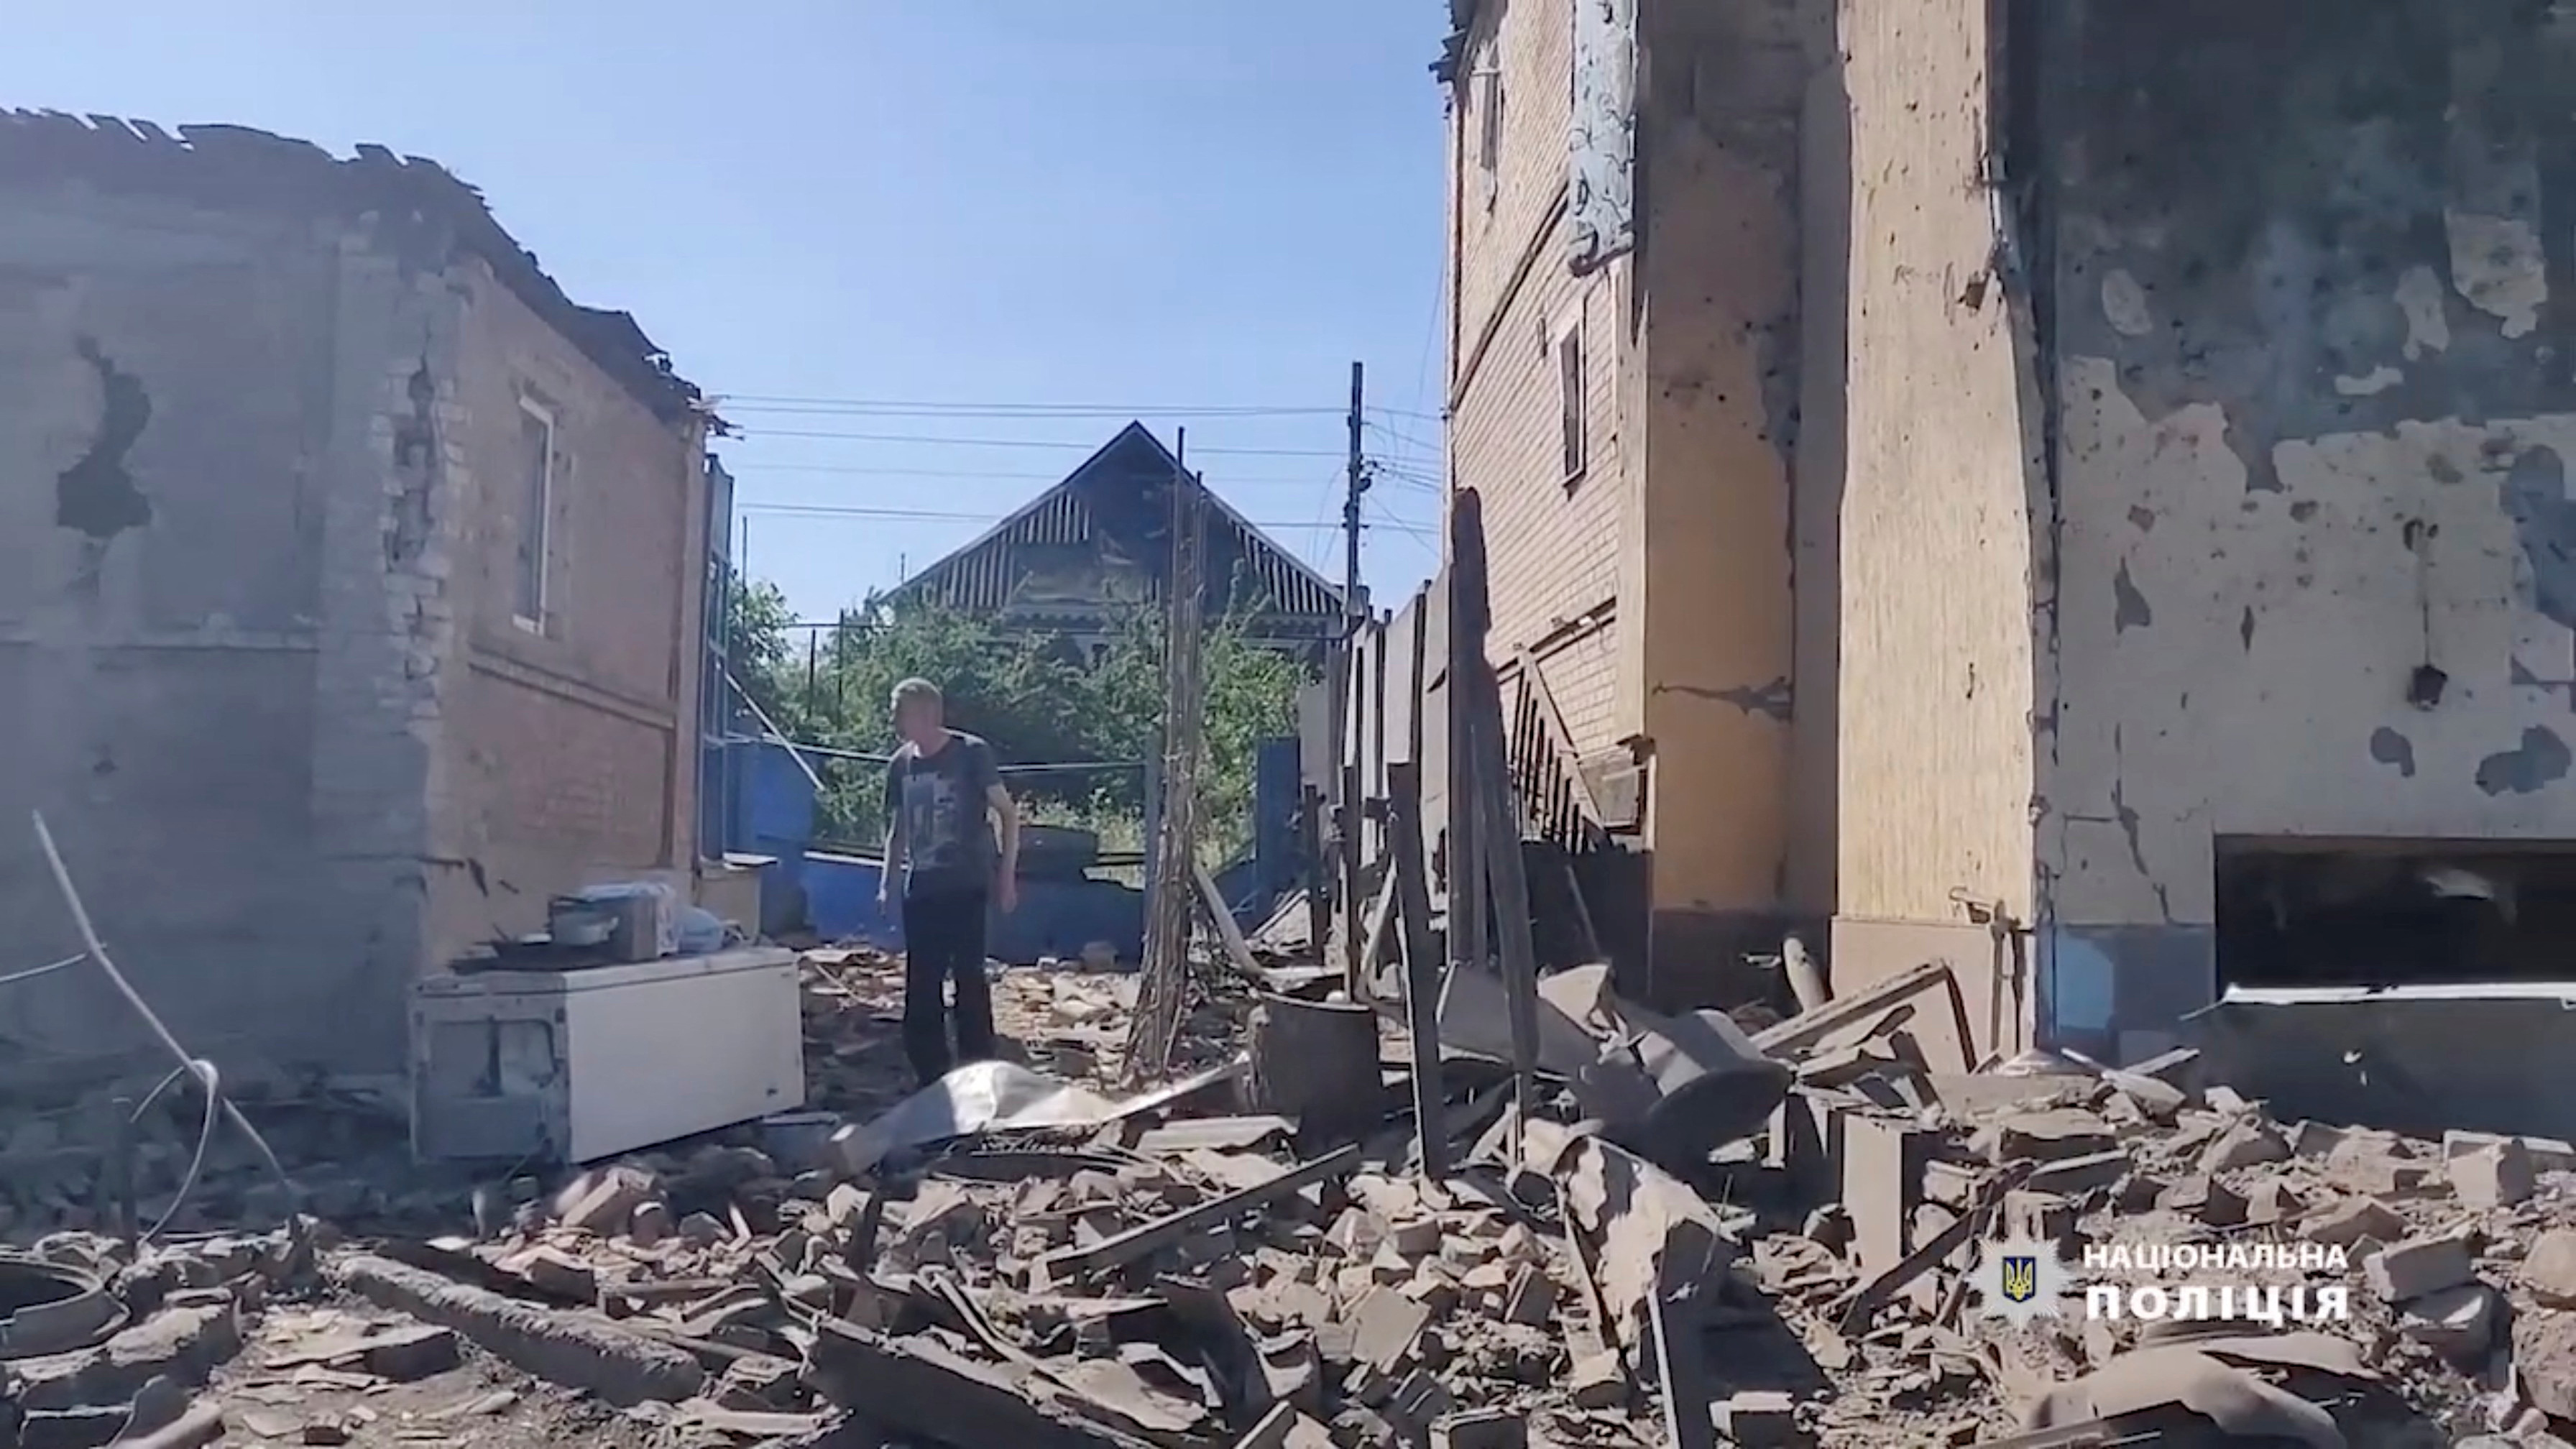 A man walks in the rubble near damaged buildings, as Russia's invasion of Ukraine continues, in Bakhmut